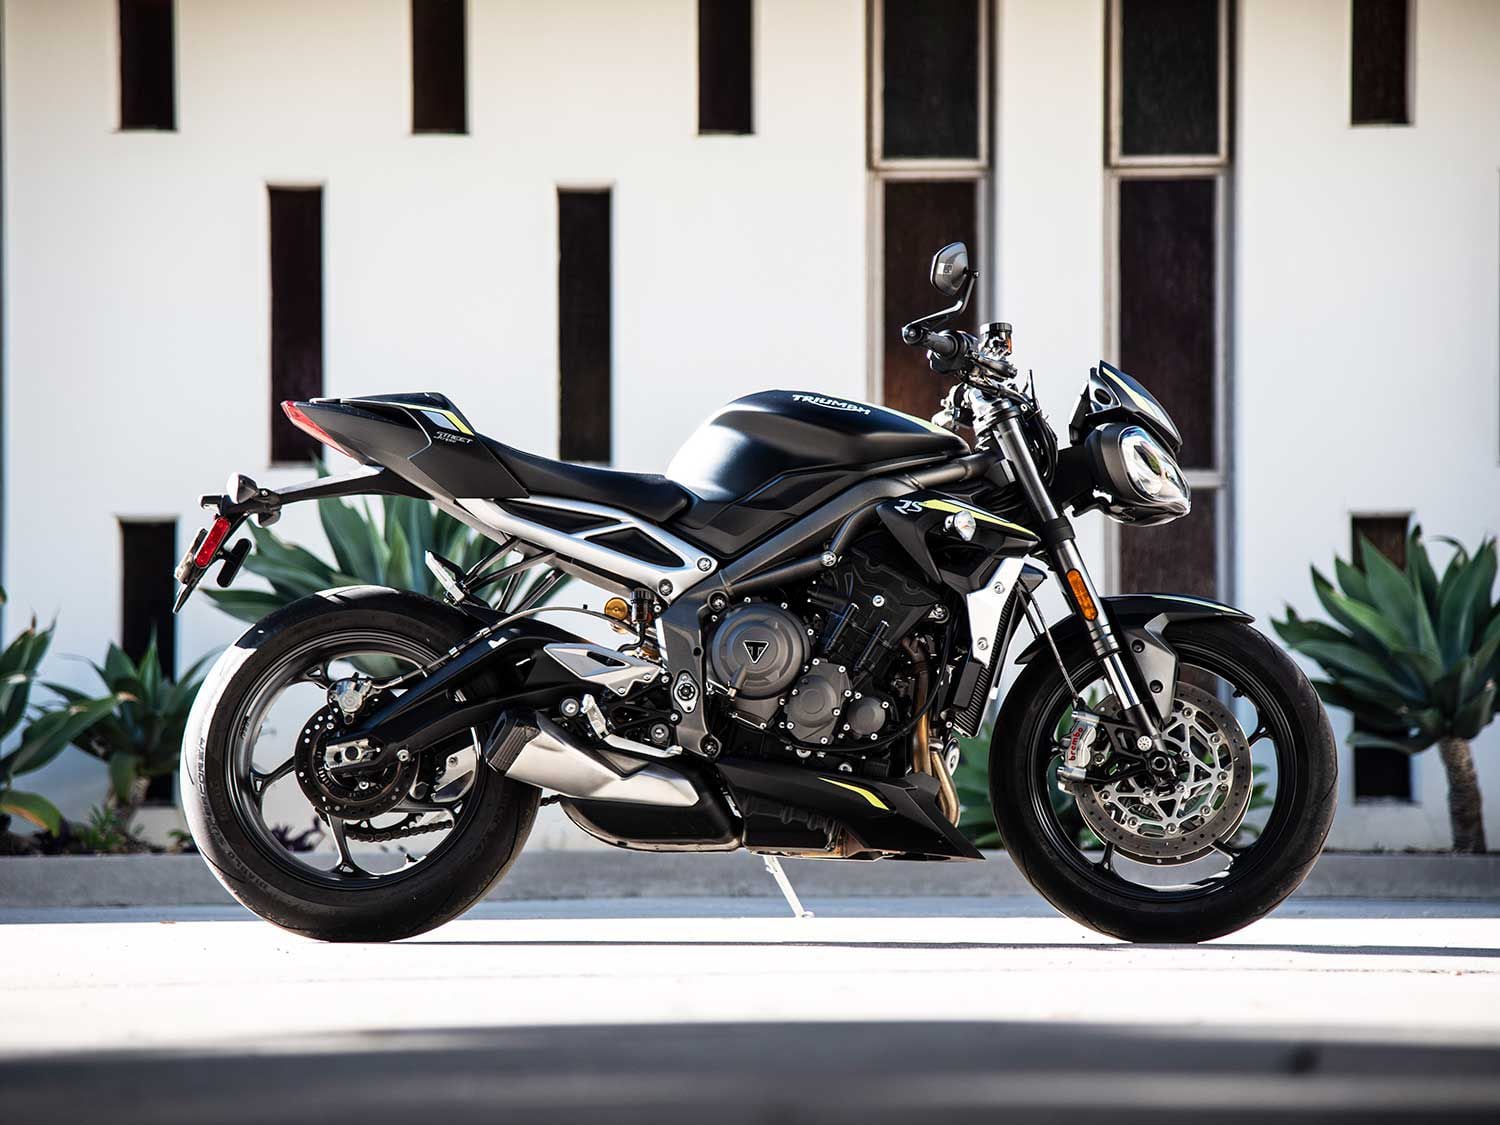 The Street Triple’s aggressive stance is accentuated by bar-end mirrors and a purposeful leading edges.